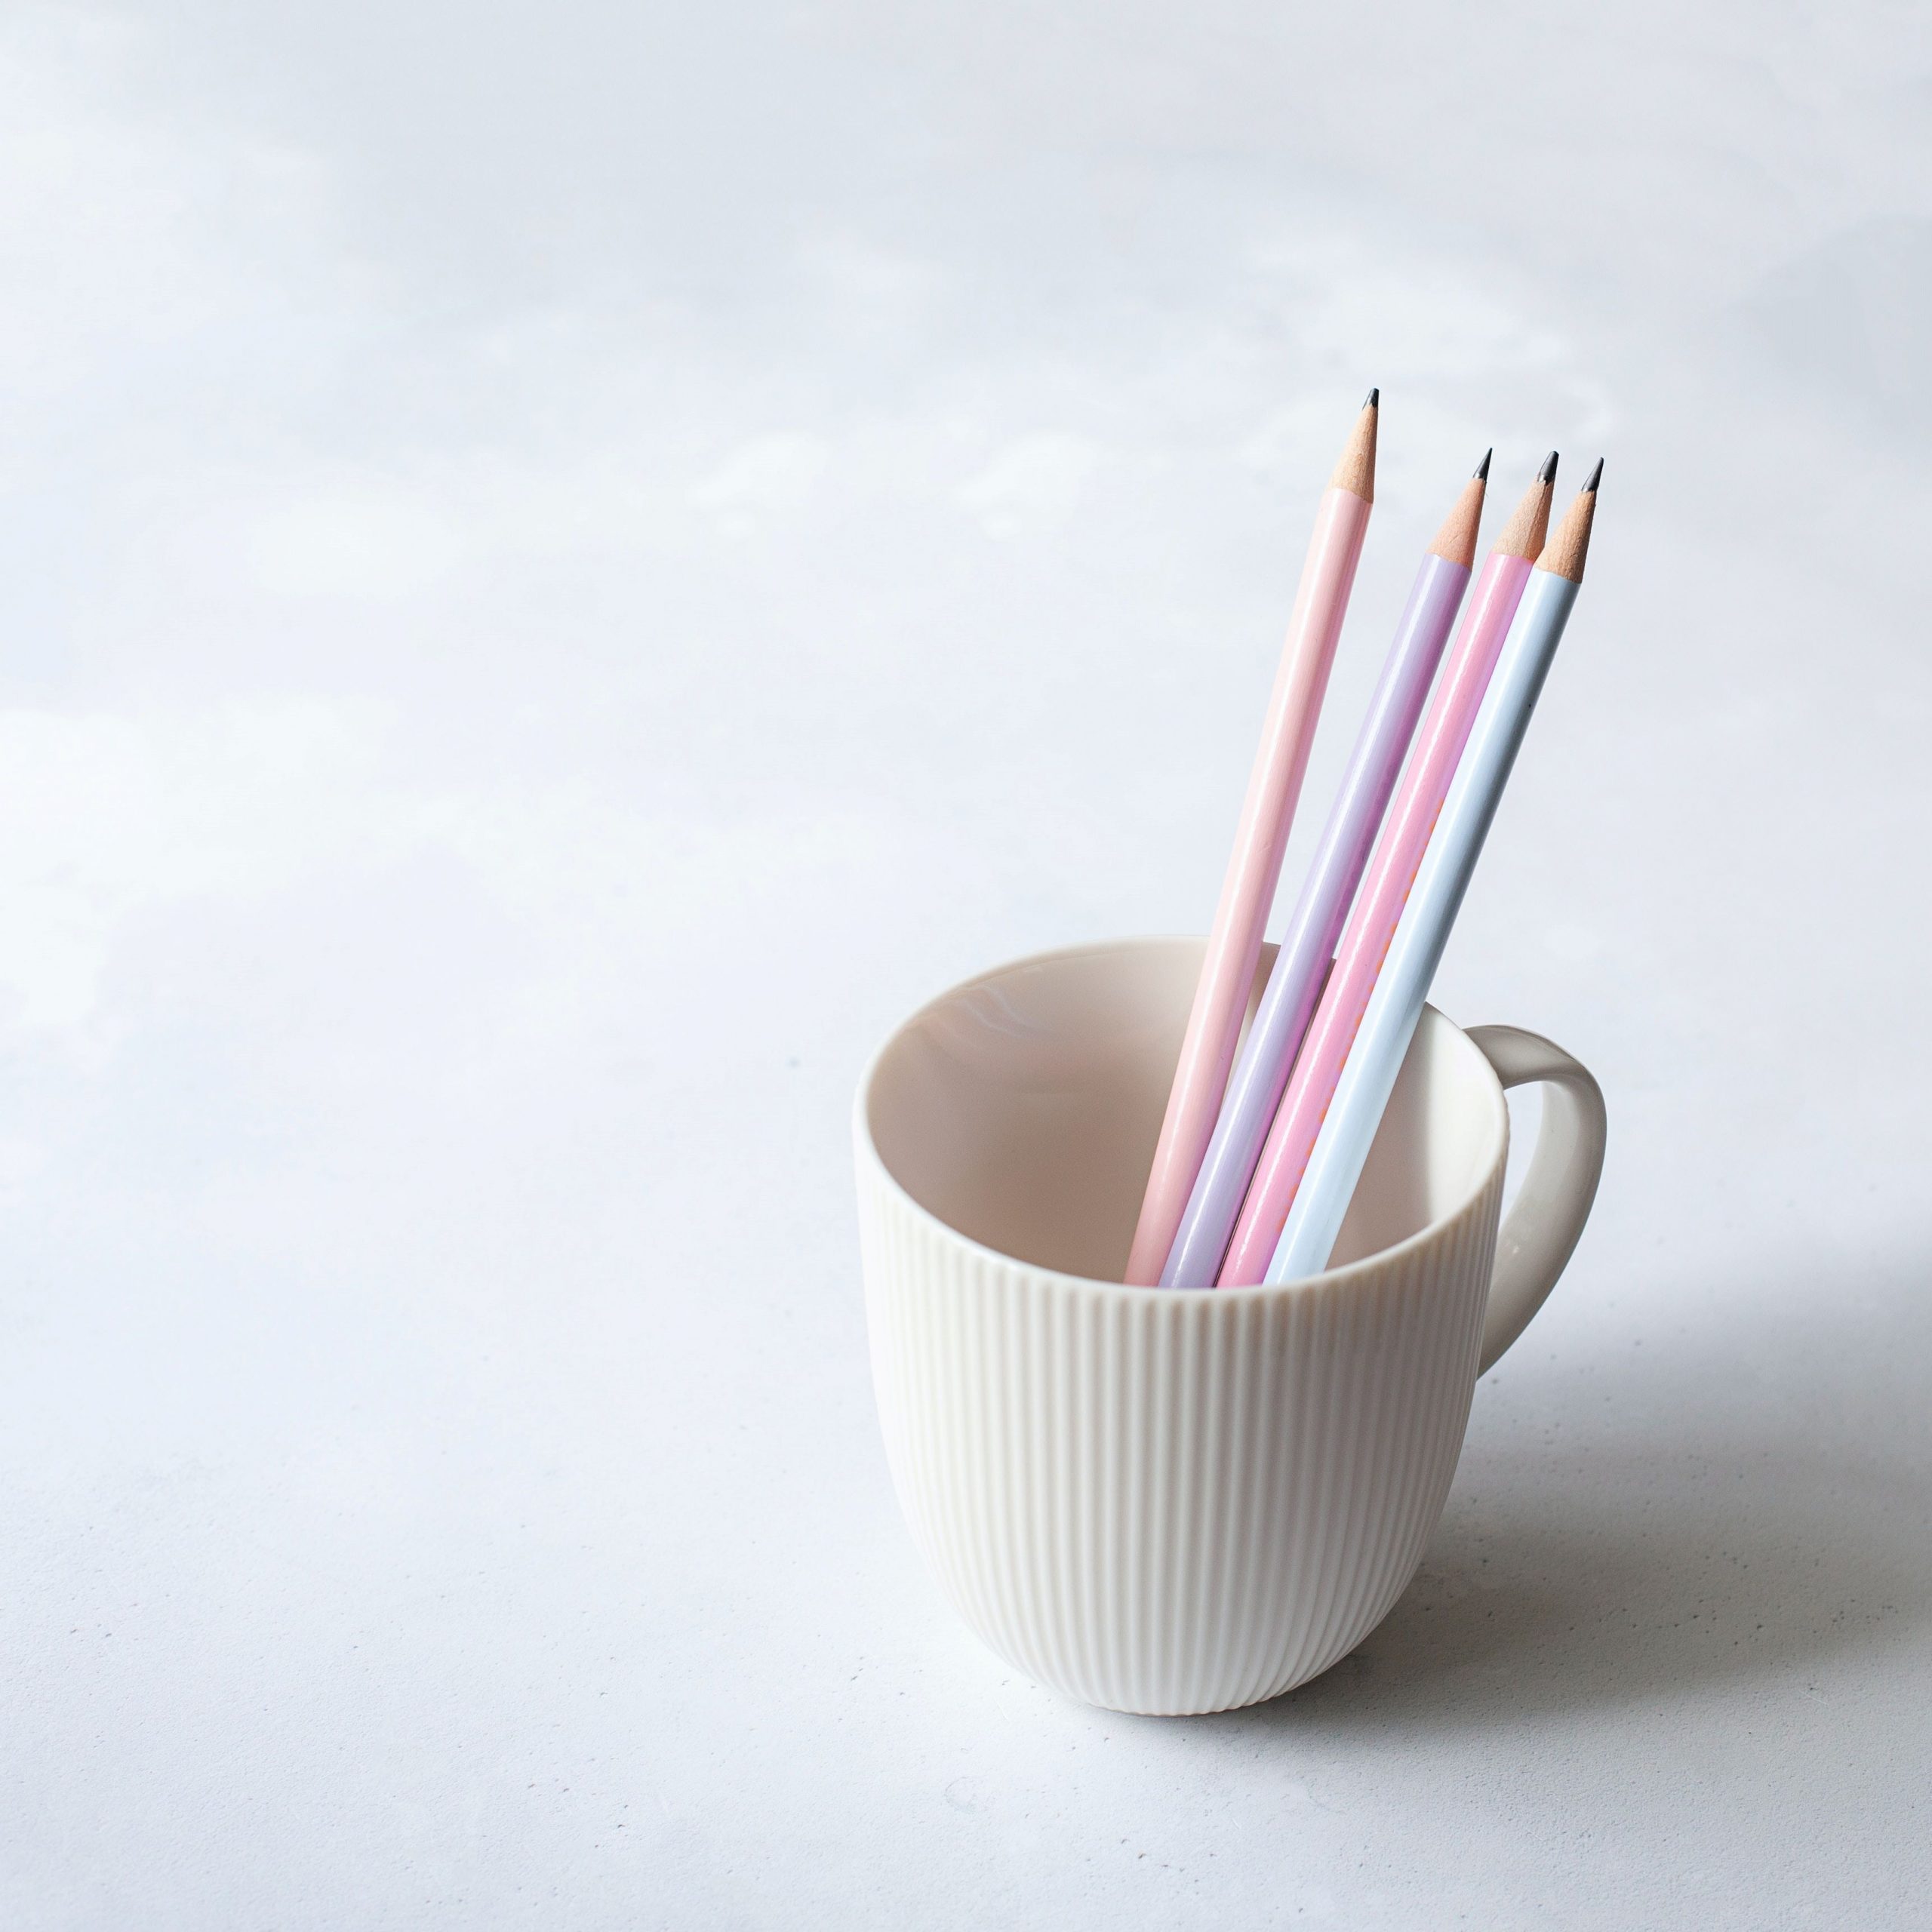 SEO mini audit. White cup with four pink pencils